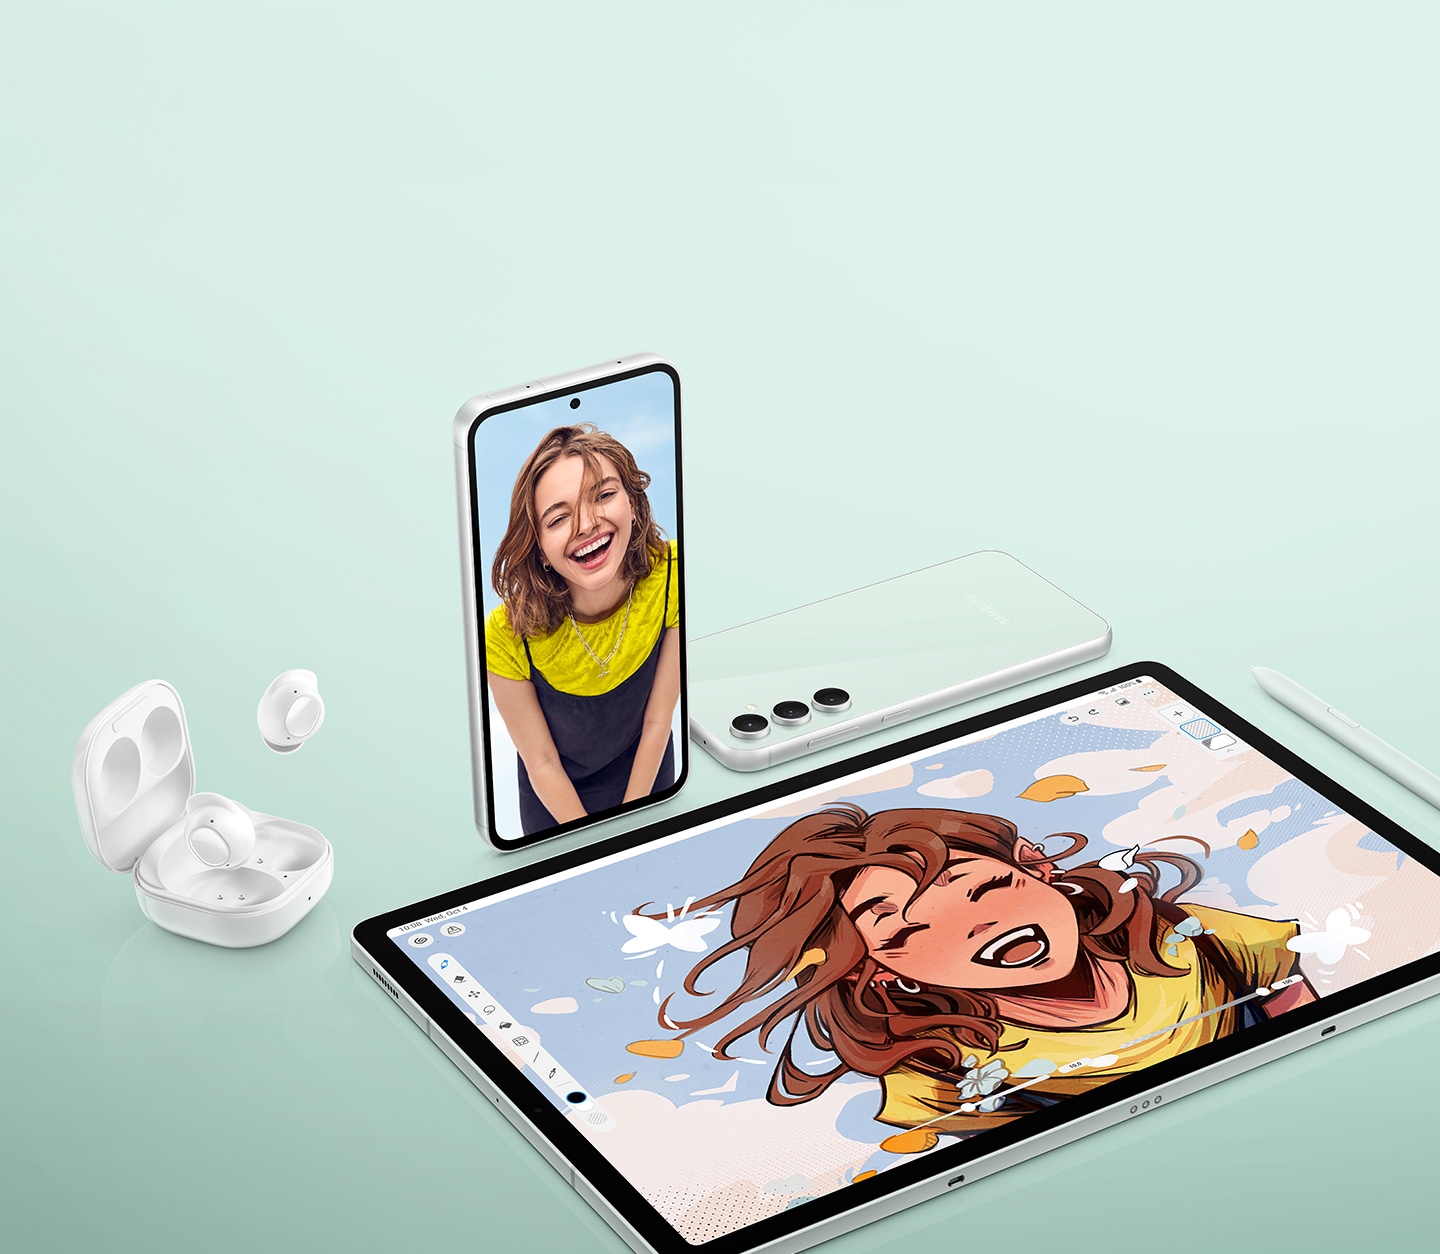 An open case of Galaxy Buds FE is seen with one earbud inside and one earbud outside. A Galaxy S23 FE device stands upright with a smiling woman on its screen. Another Galaxy S23 FE device lies face down showing its rear. A Galaxy Tab S9 FE Plus tablet shows a digital drawing of the smiling woman, with an S Pen placed nearby.